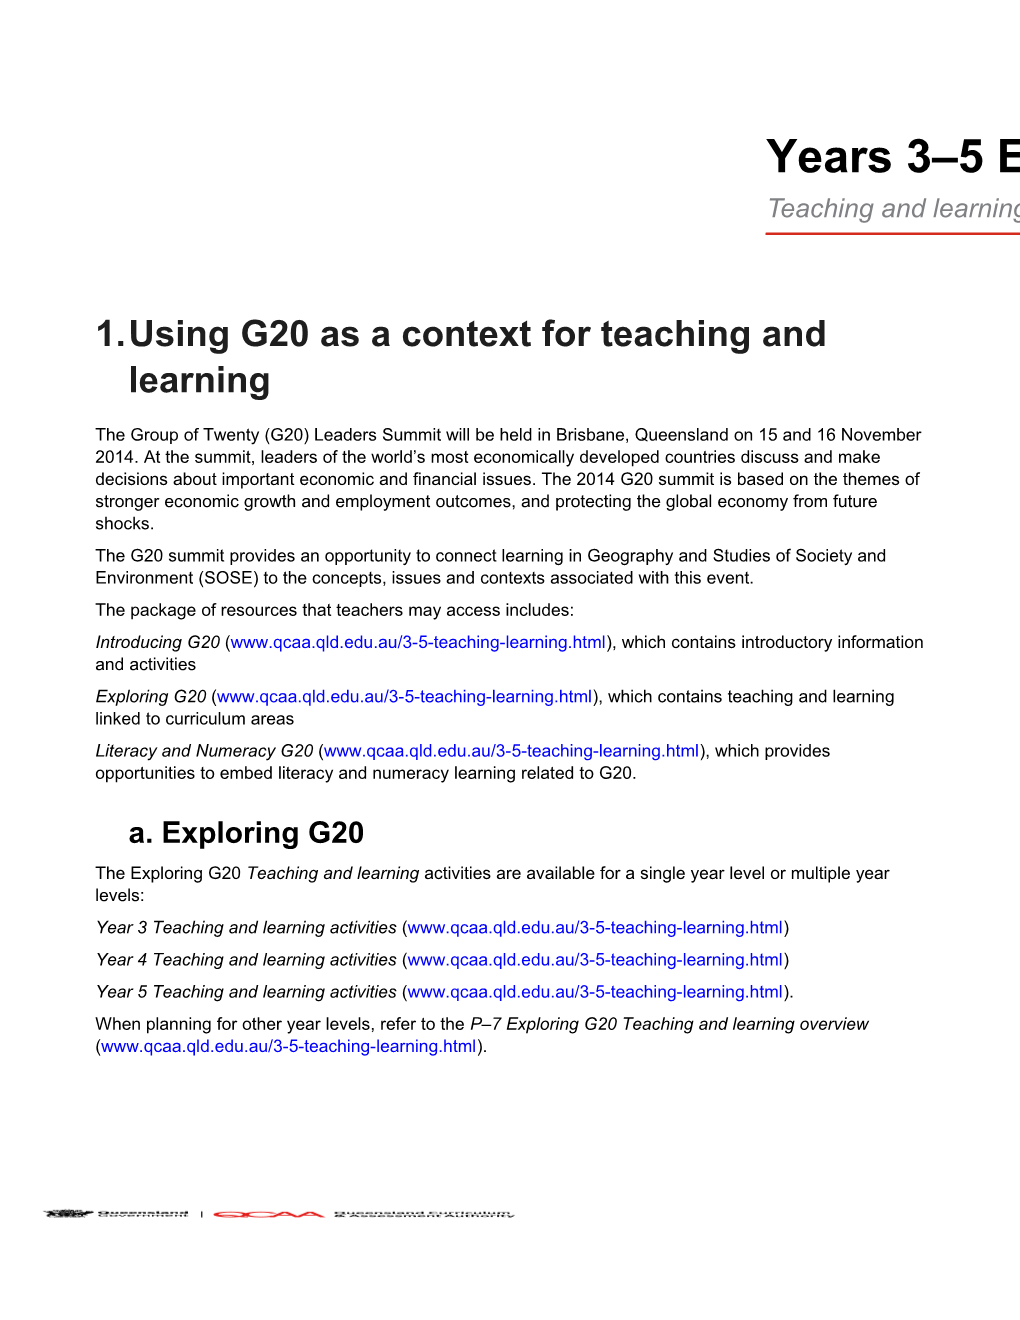 Year 3-5 Exploring G20: Teaching and Learning Activities